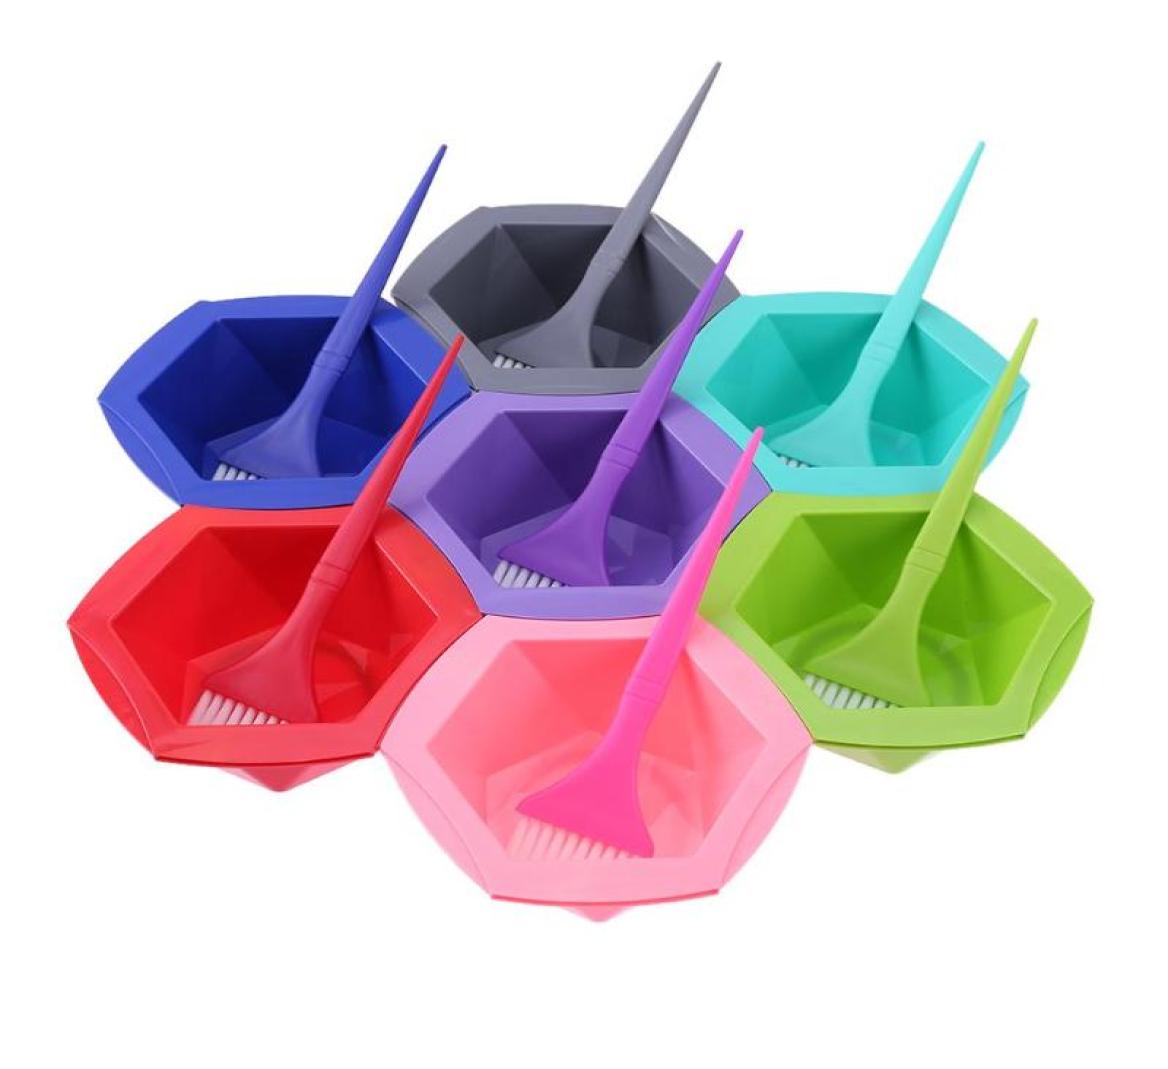 

7pcsset Colorful Hair Dying Brushes Plastic Stirring Bowl Pro Salon Barber Hairdressing Set Salon Easycleaning Dying Tools2938264